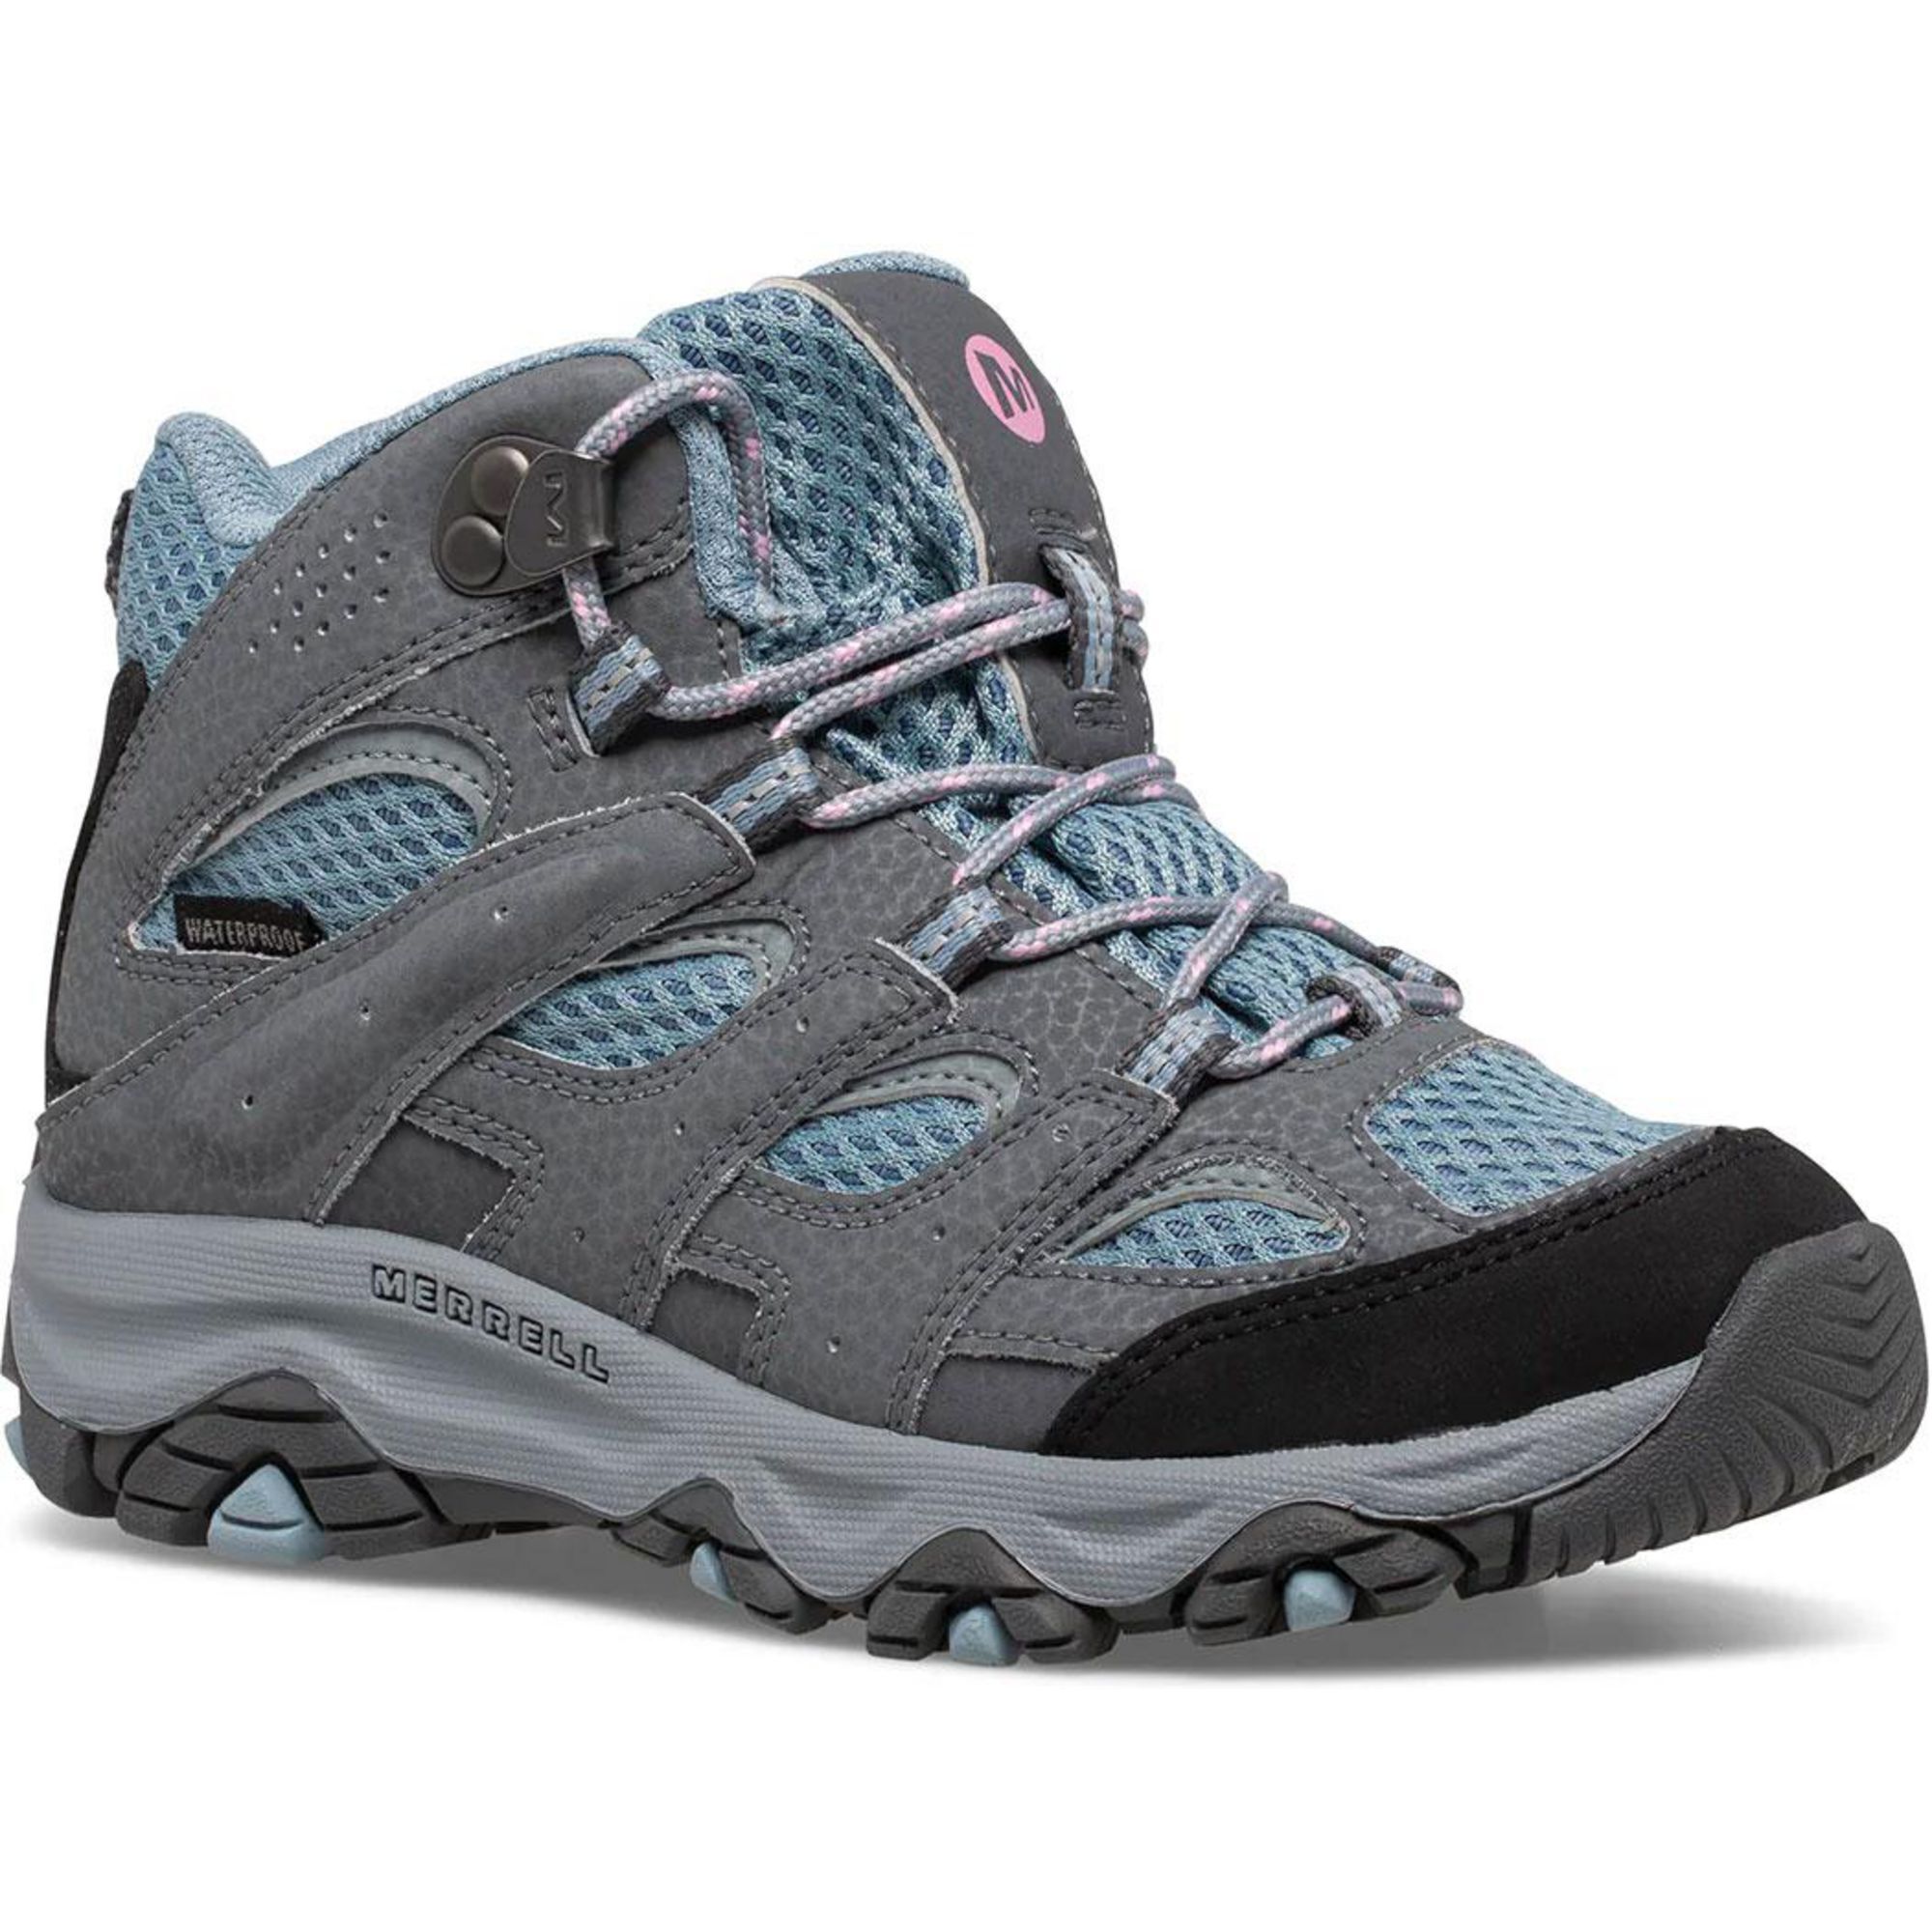 Merrell Girls' Moab 3 Mid Waterproof Hiking Boots  - Boulder/Red - Size: 5